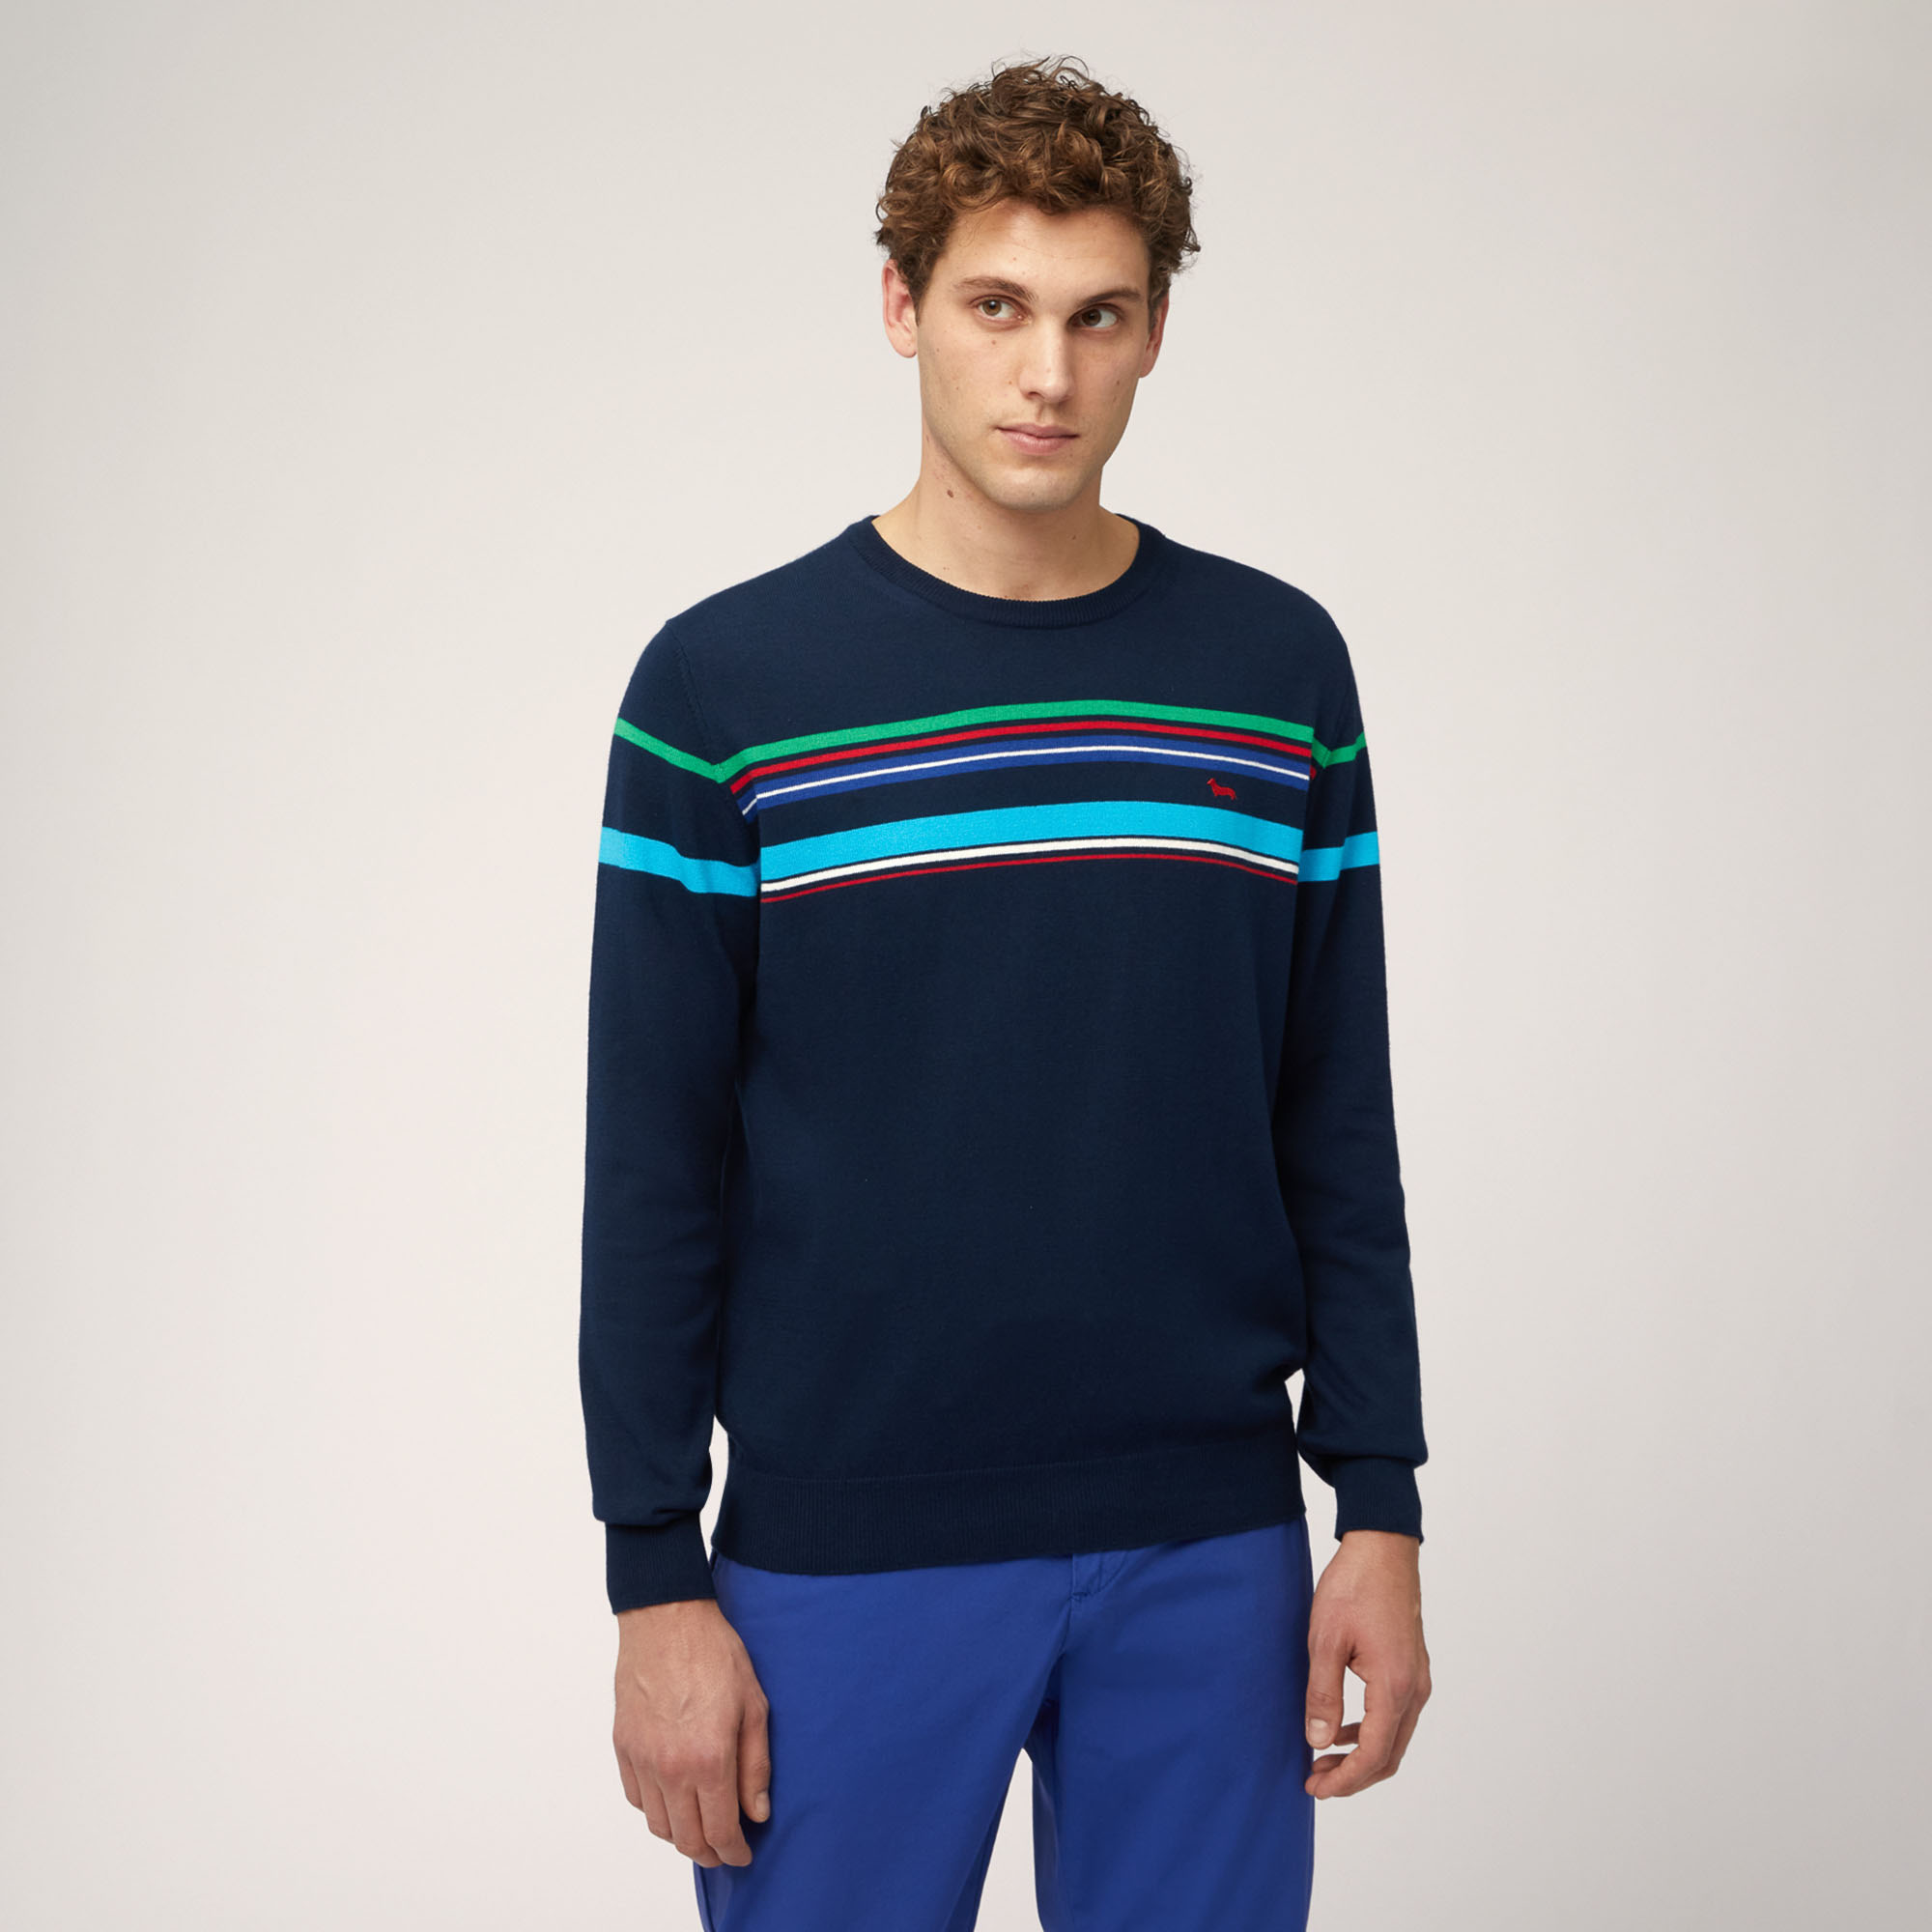 Organic Cotton Crew Neck Pullover with Color Block Stripes